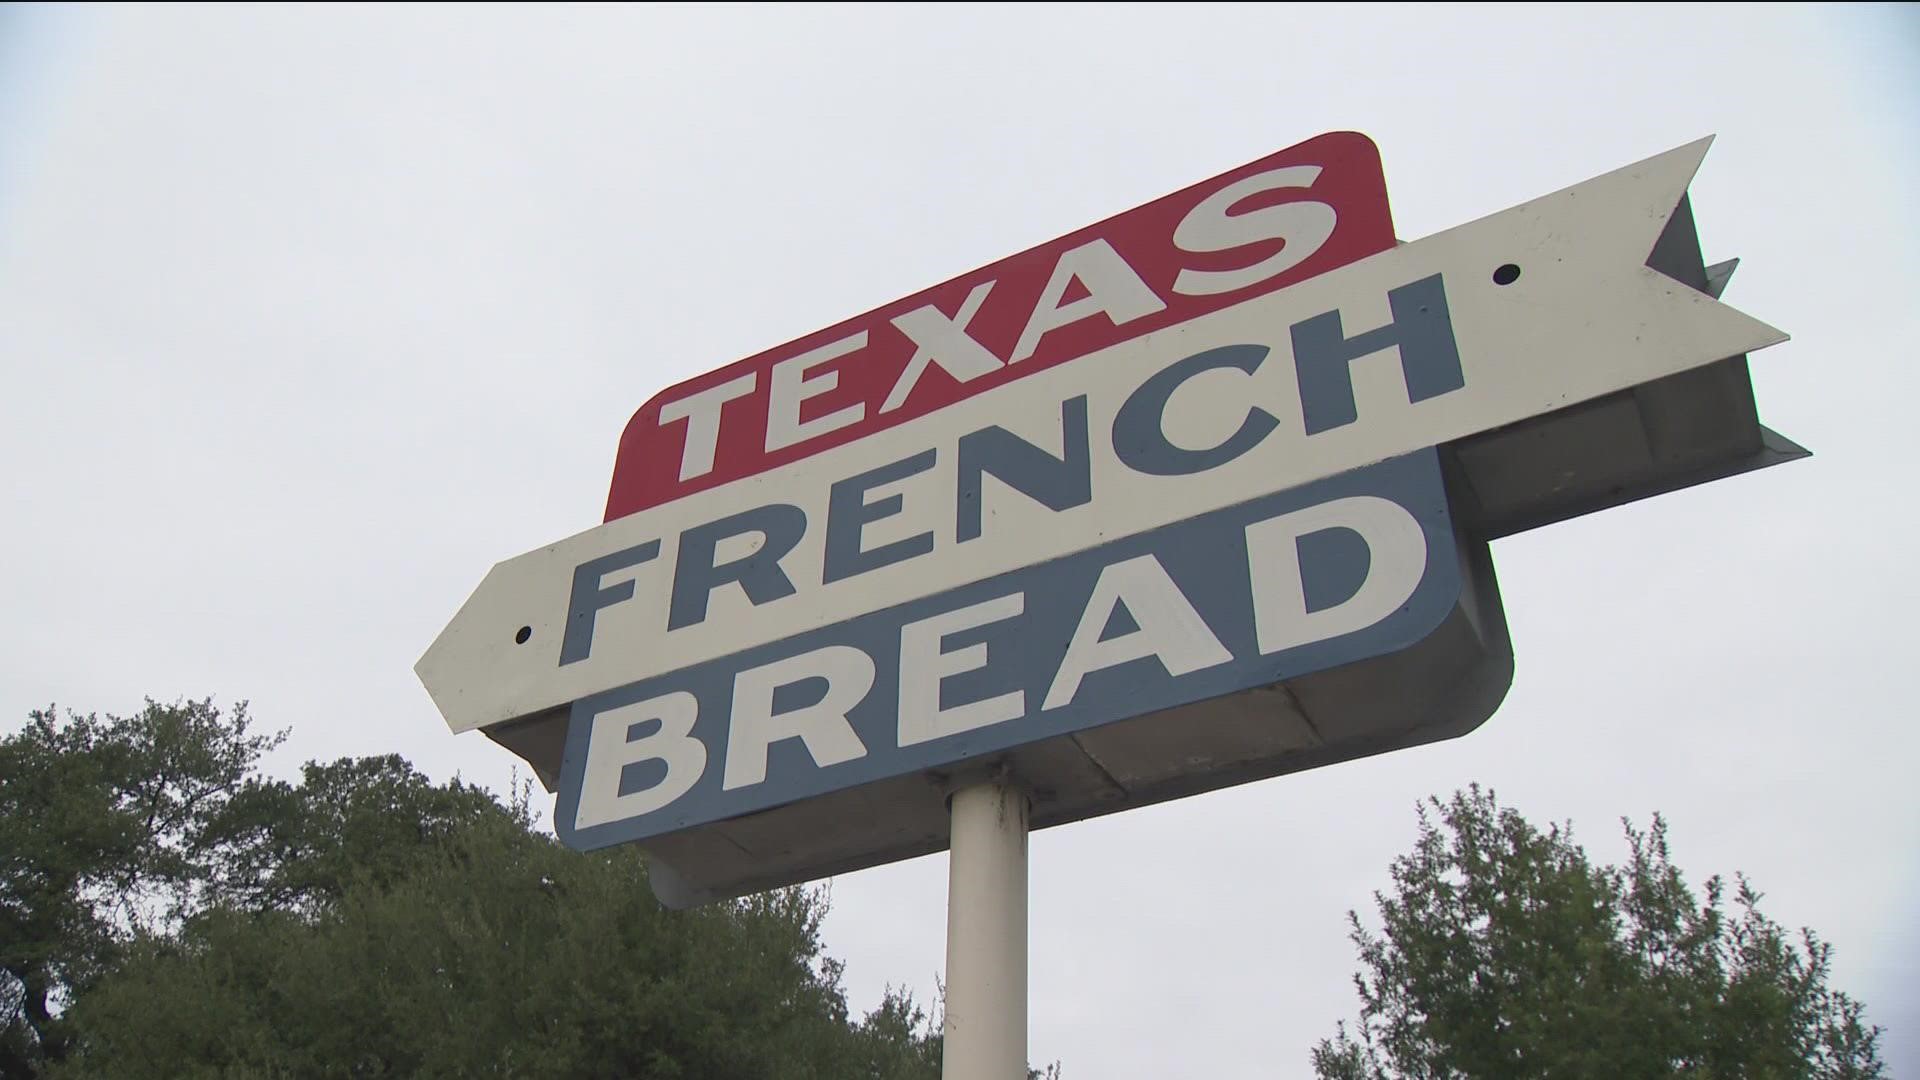 After the original building collapsed in a fire, the French pâtisserie staple is coming back to Austin.